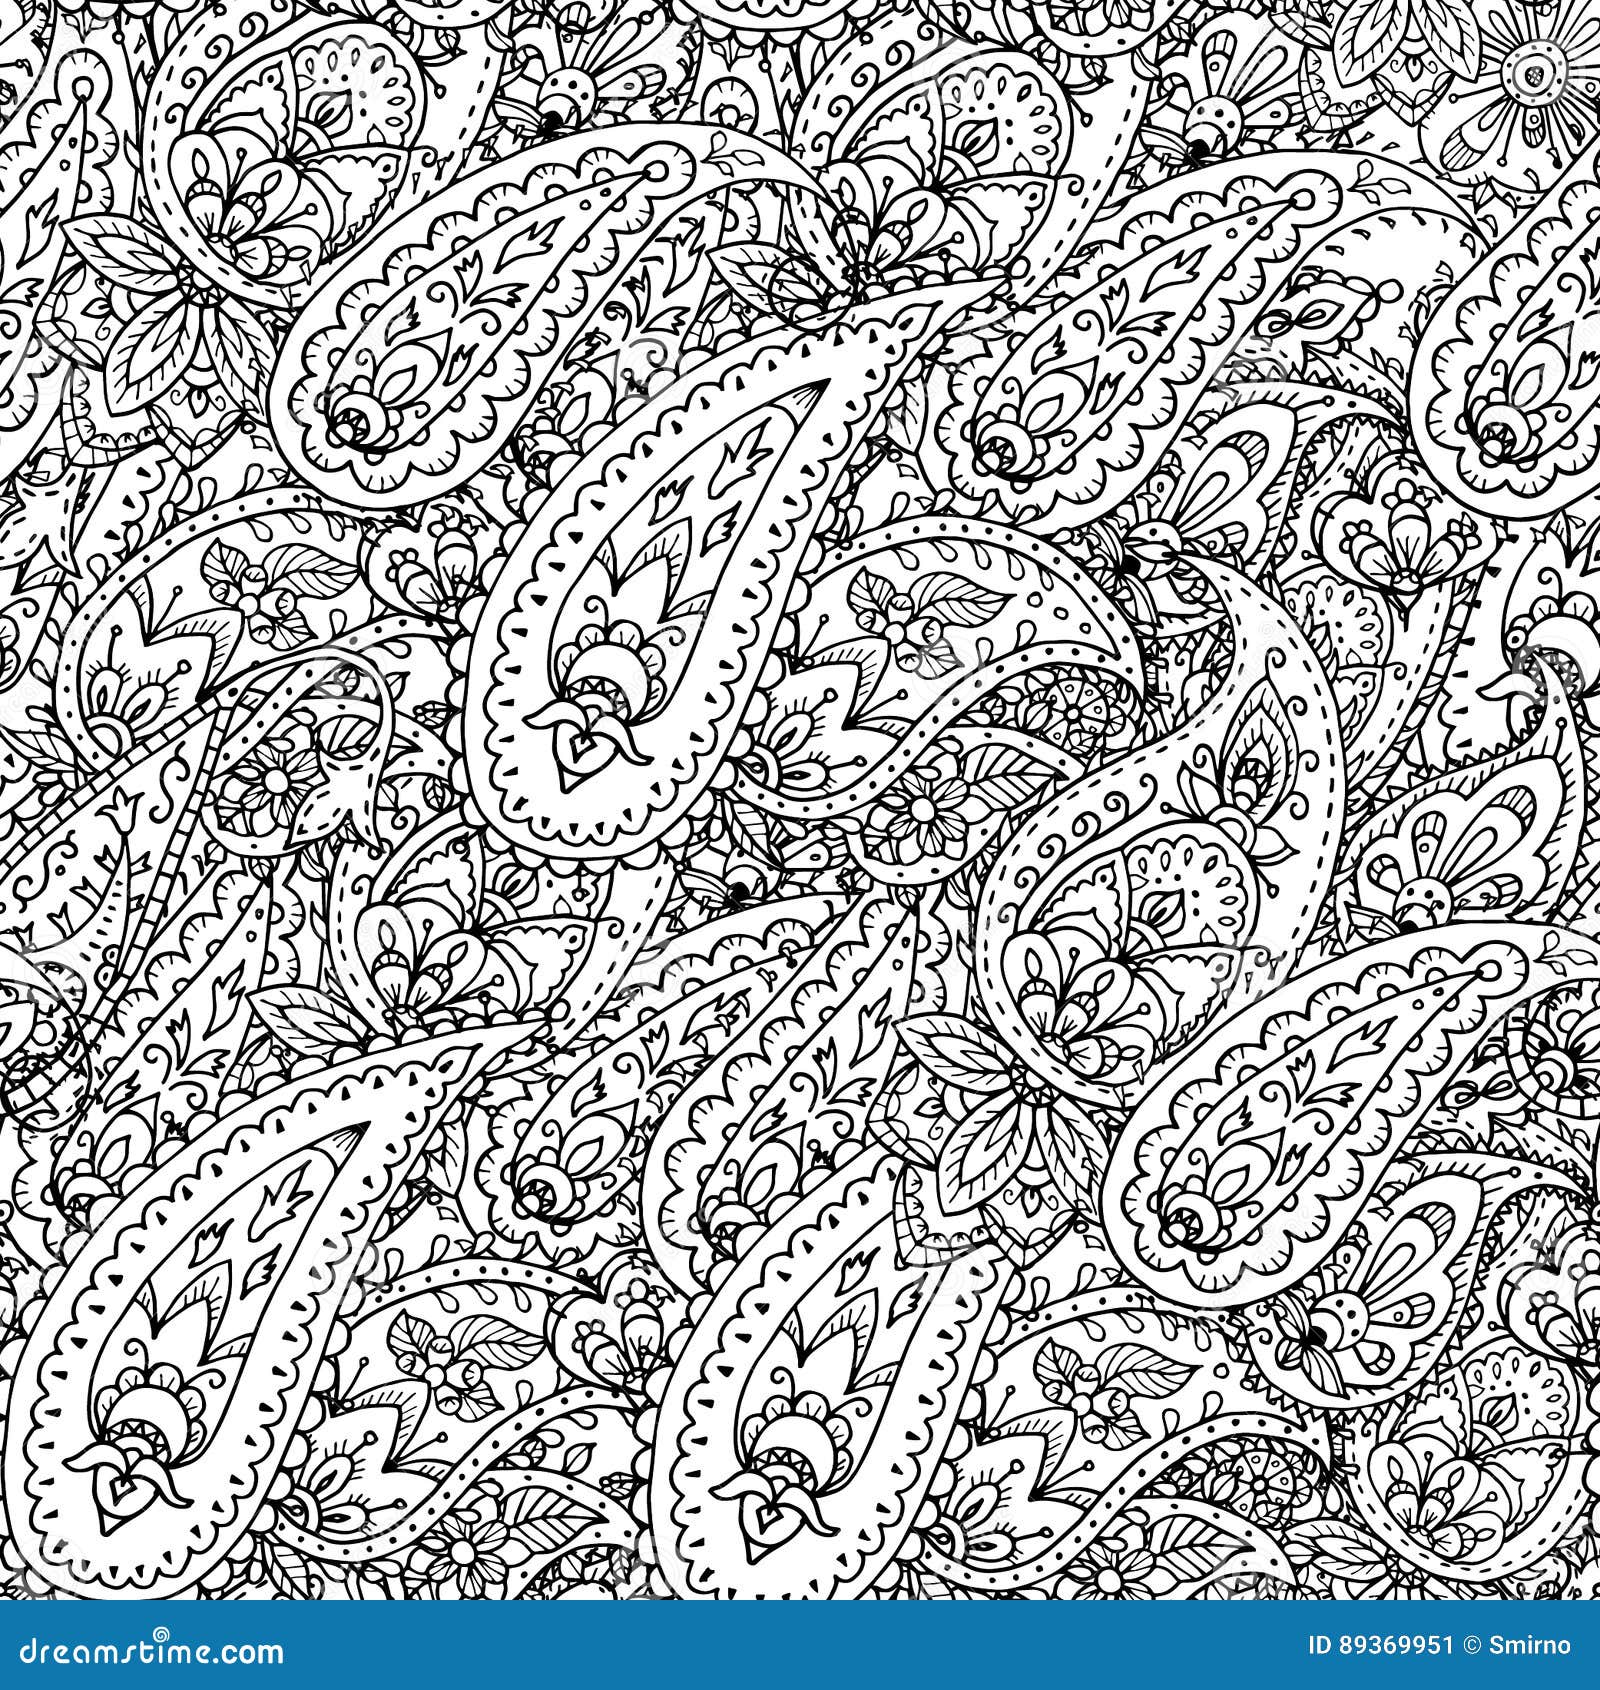 Seamless Indian Paisley Pattern. Black and White Illustration for ...